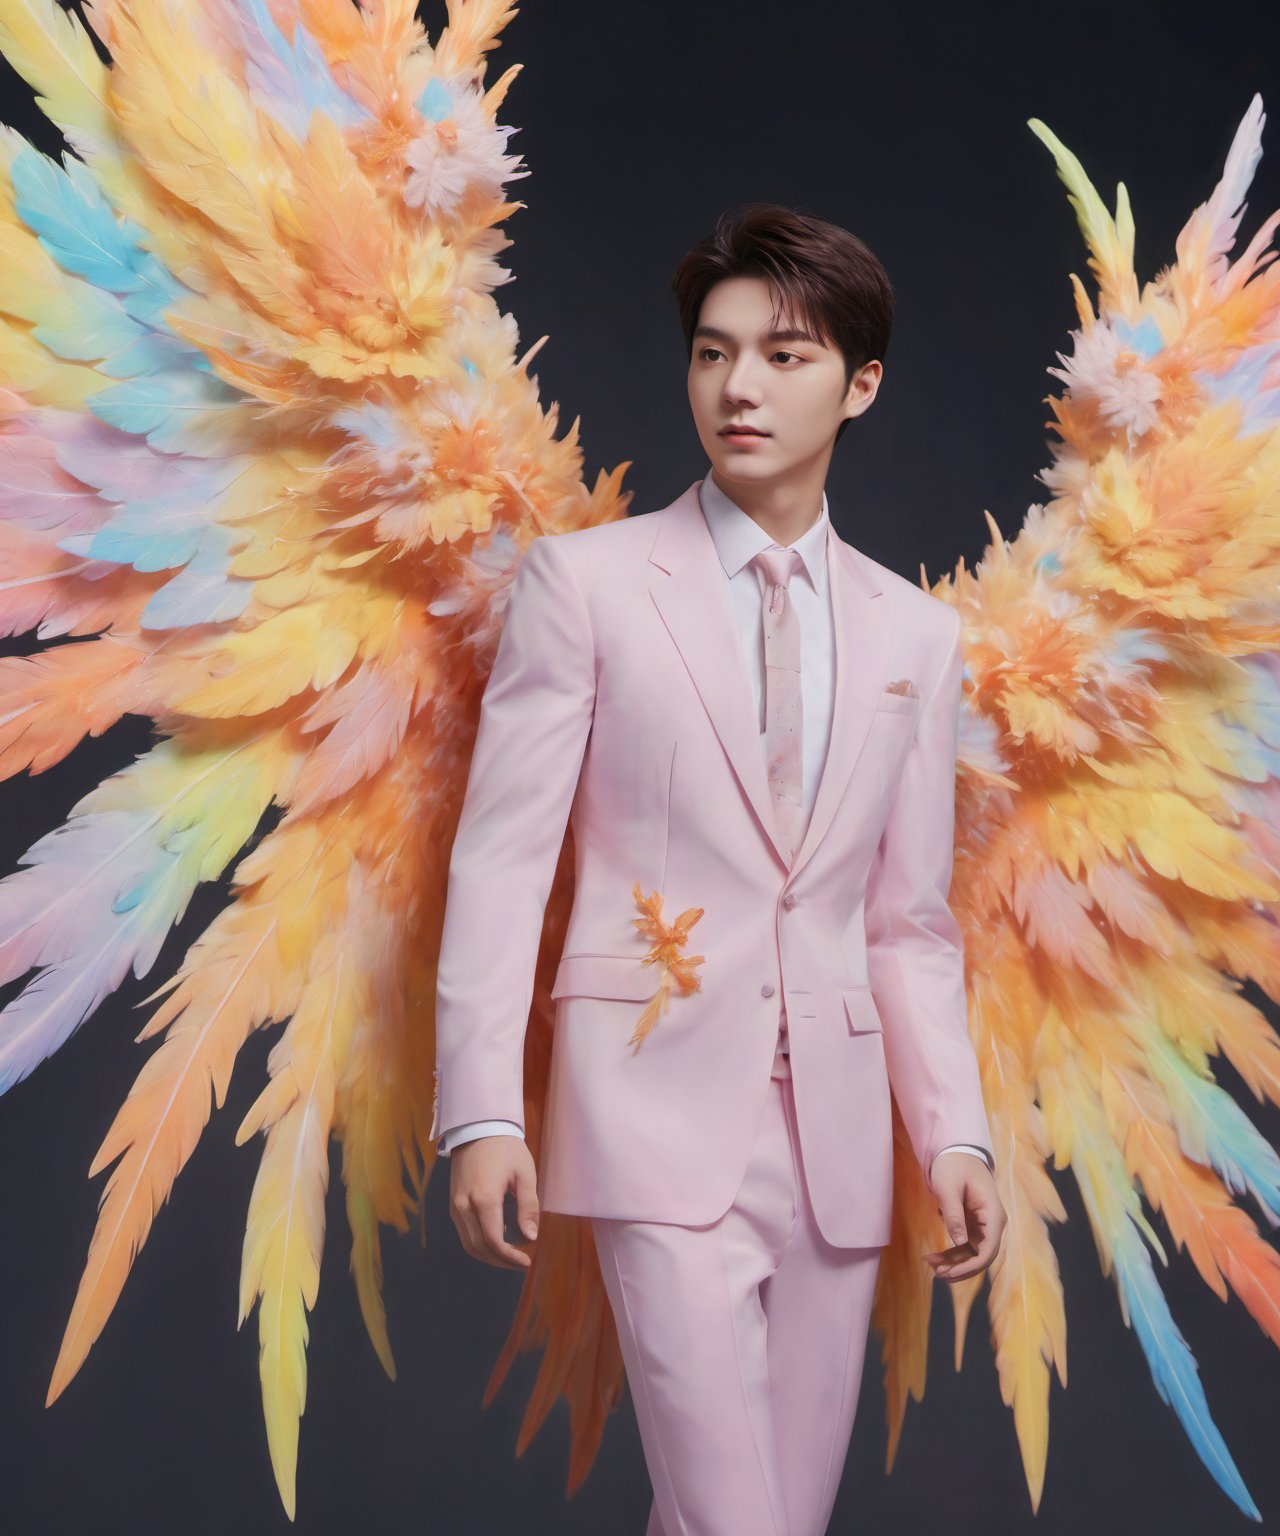 Create an image of a young man wearing a suit, featuring vibrant, crystal giant wings extending from his back. Random movement The background should be plain white, emphasizing the contrast and detailing of the beauty wings and the sharpness of the suit. The man should appear poised and elegant, with the wings unfurled to showcase a spectrum of vivid hues, blending seamlessly from one color to another. The focus should be on the meticulous details of the wings’ feathers and the suit’s fabric, capturing a harmonious blend of natural and refined elements, wings,Stylish, close up,l3min,wings,xxmixgirl